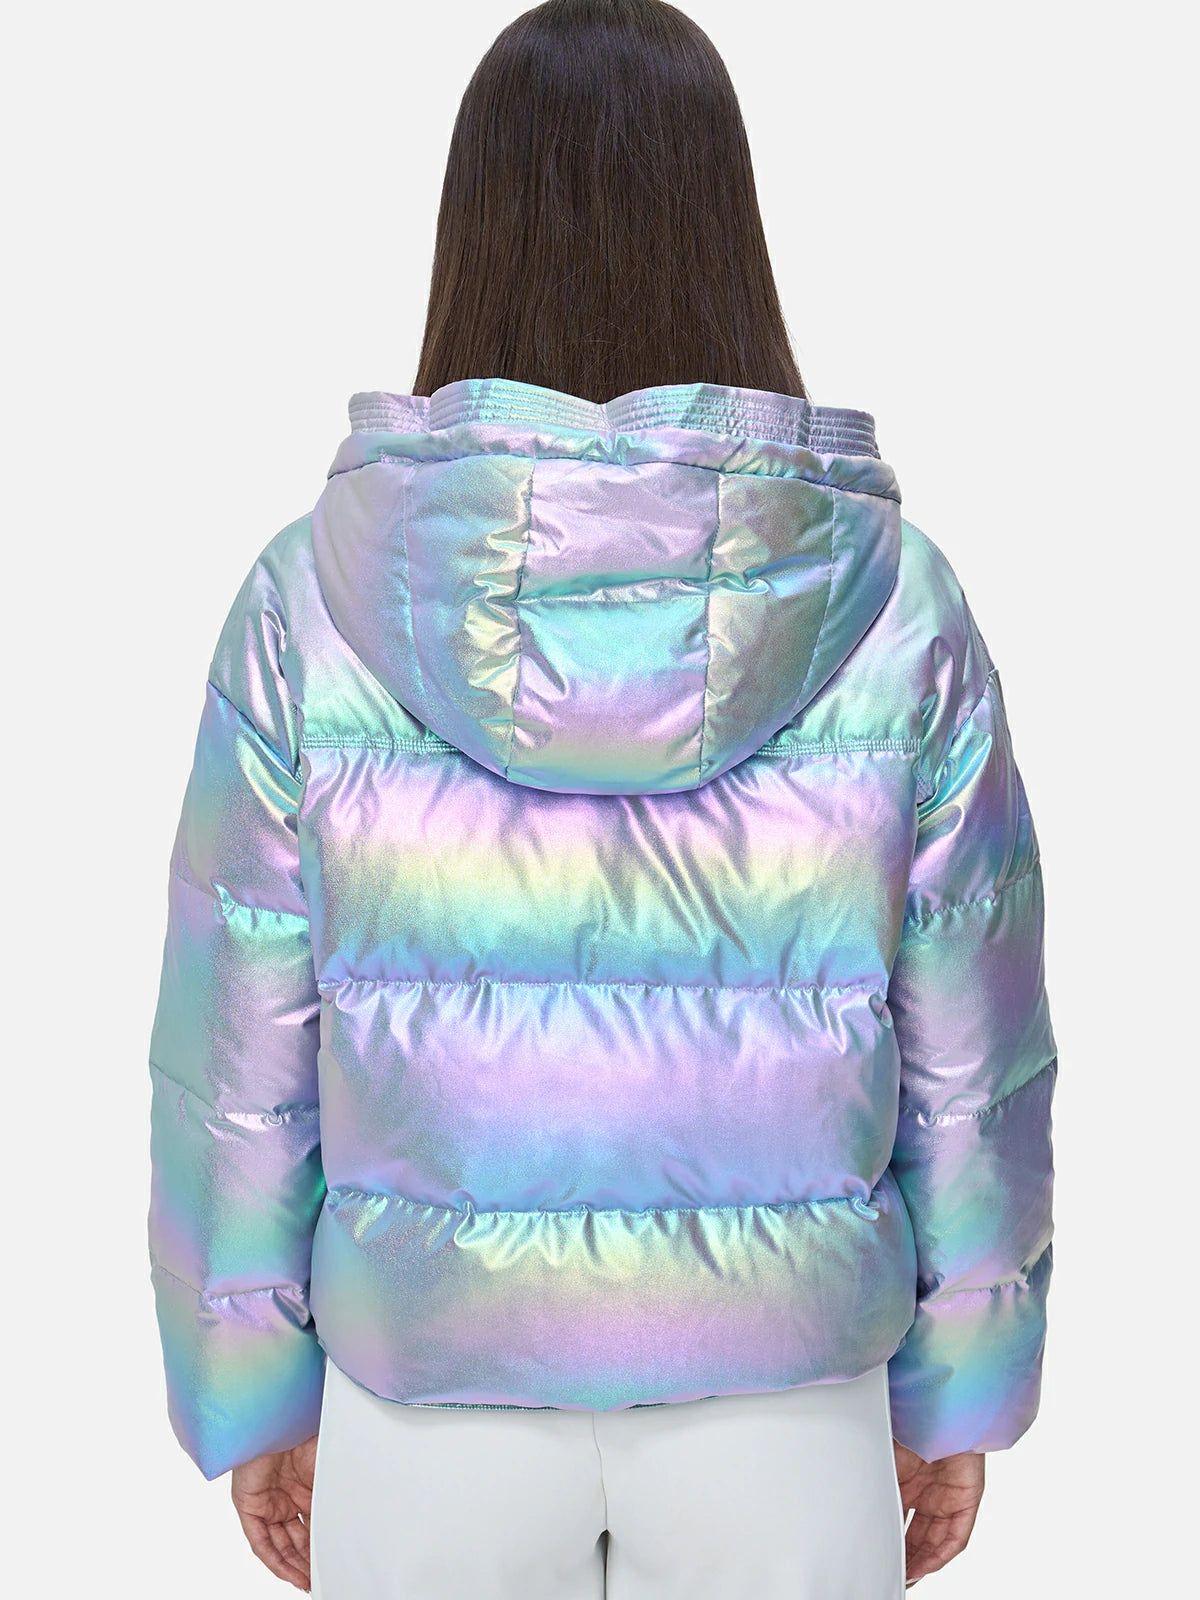 Head-Turning Iridescent Outerwear with Adjustable Hood